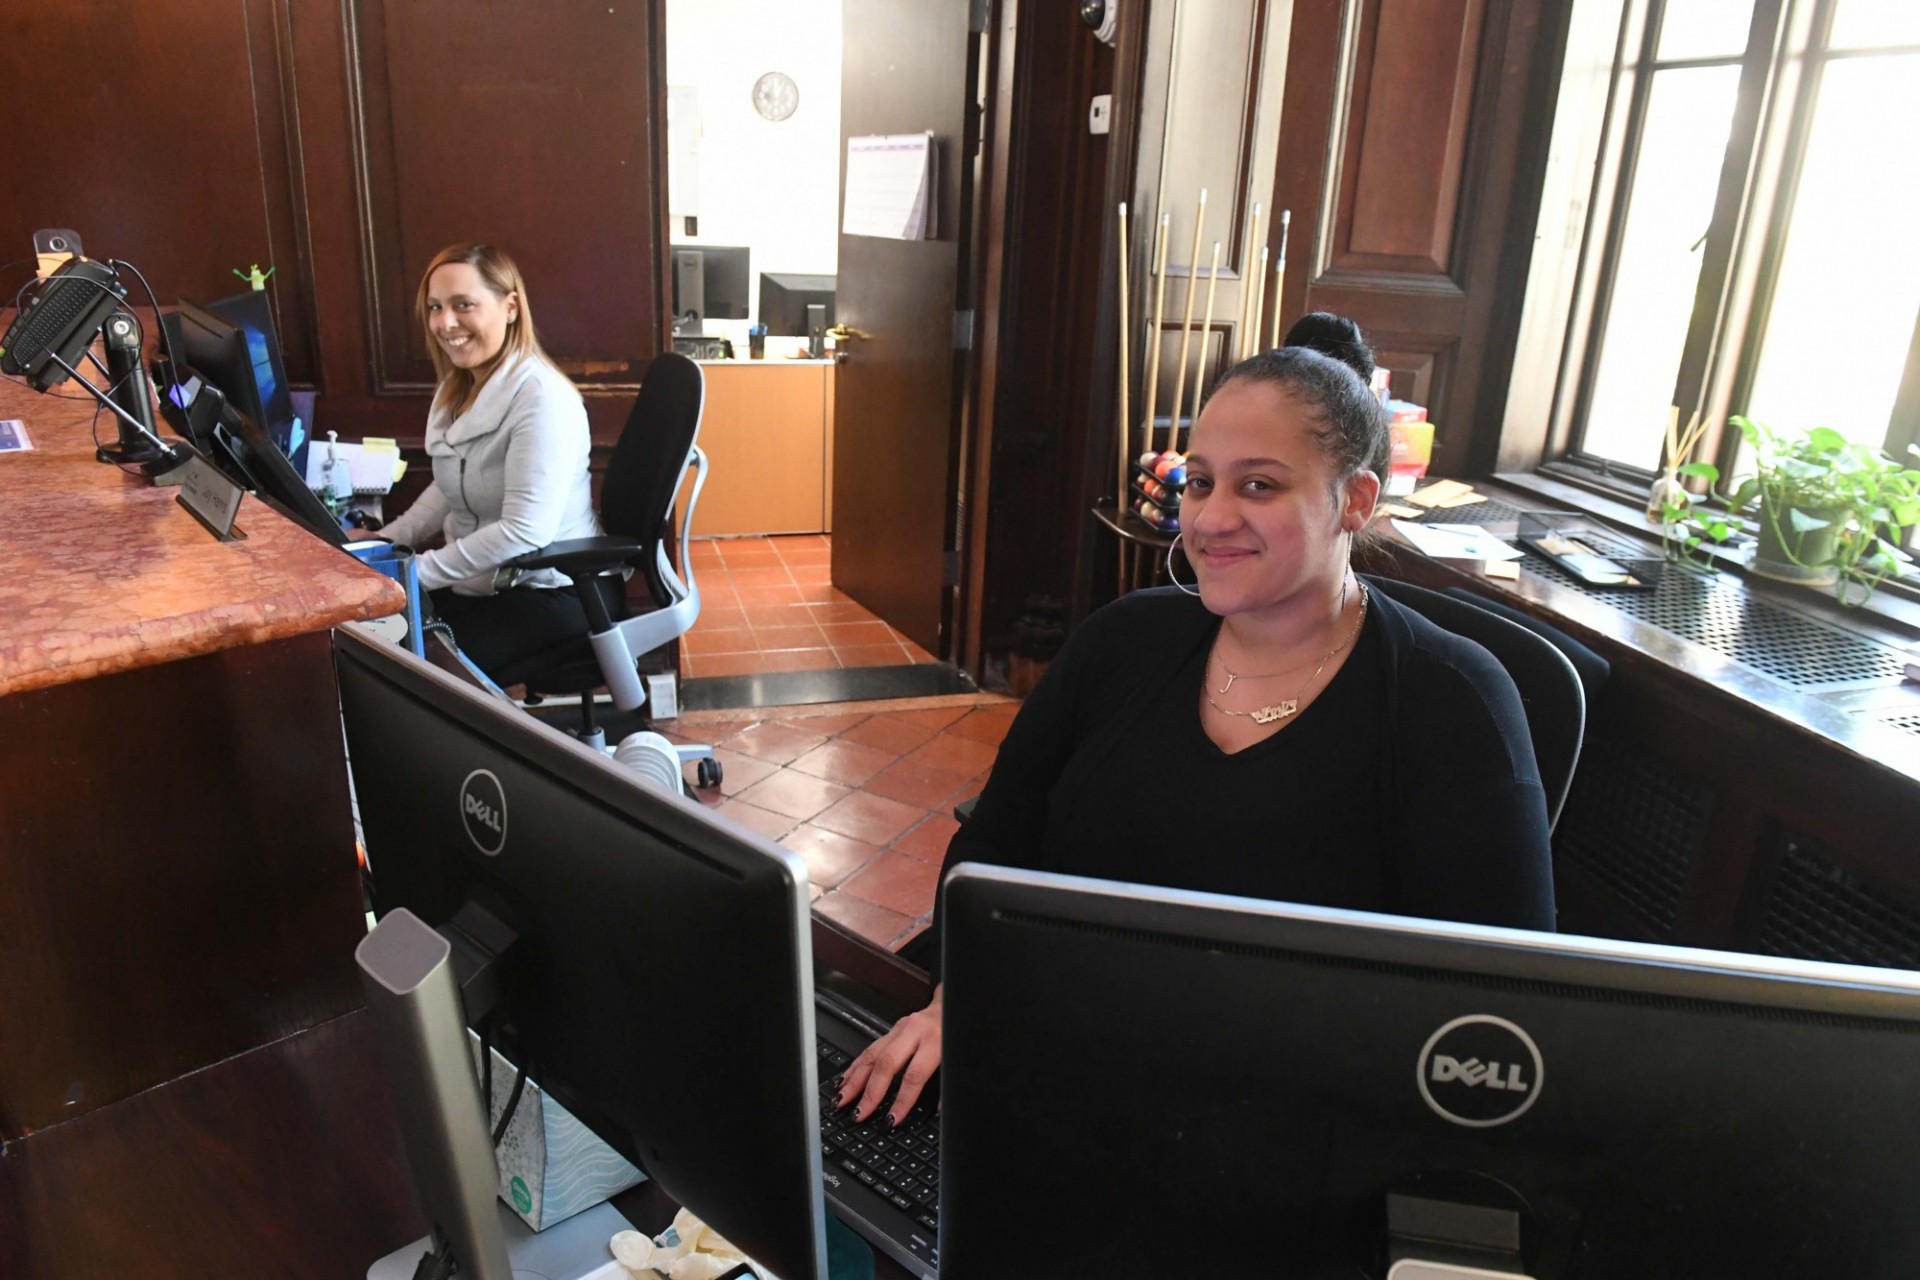 Two women sit in front of computer monitors behind a raised desk.